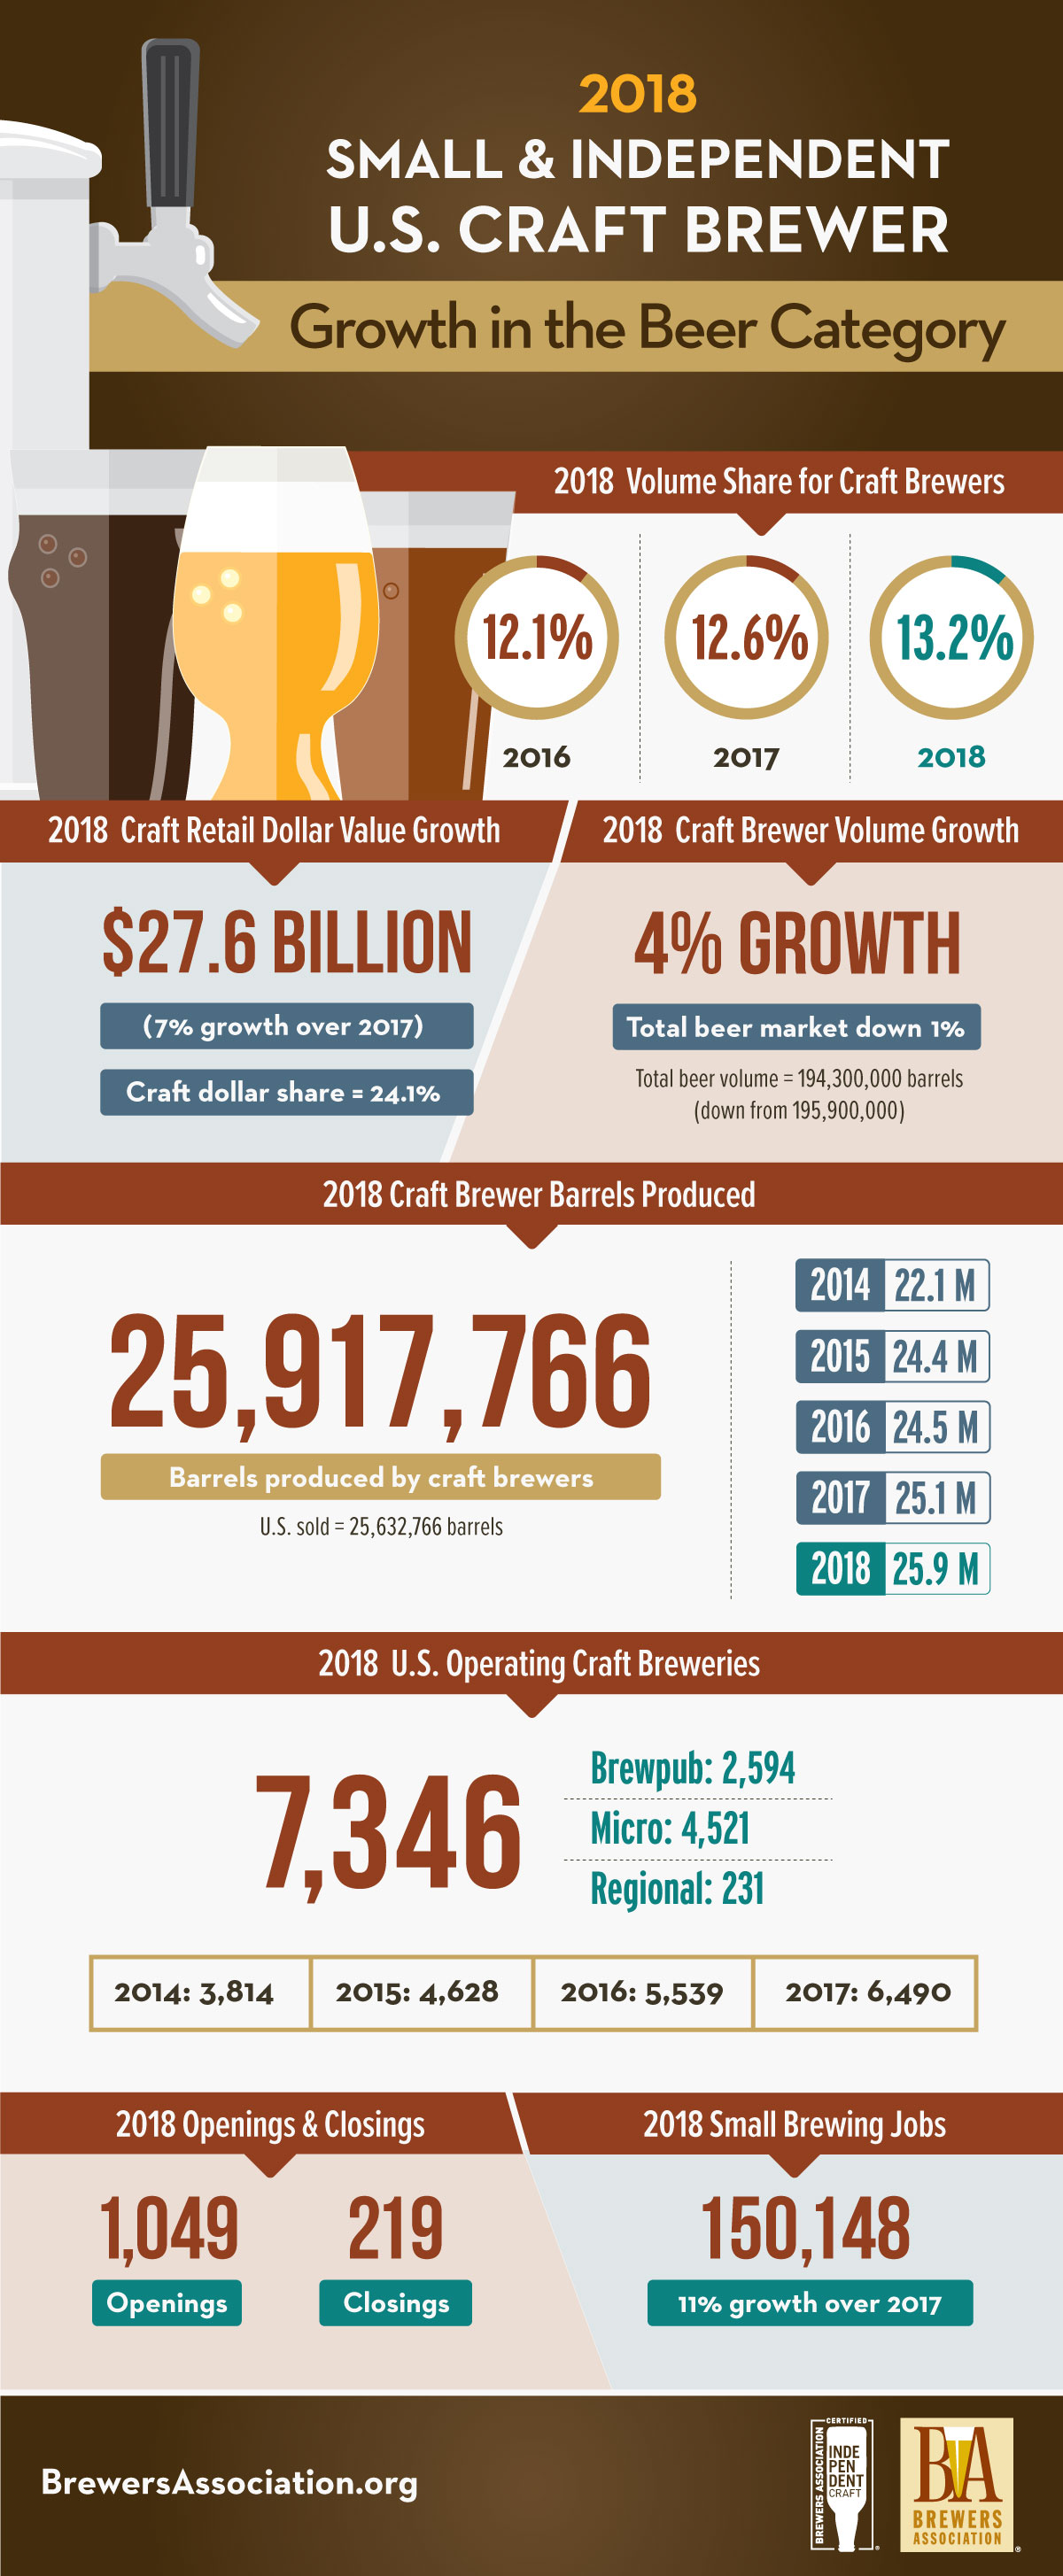 The Brewers Association released its annual growth report for small and independent craft brewers. Small and independent brewers delivered job creation and continued growth in 2018. 